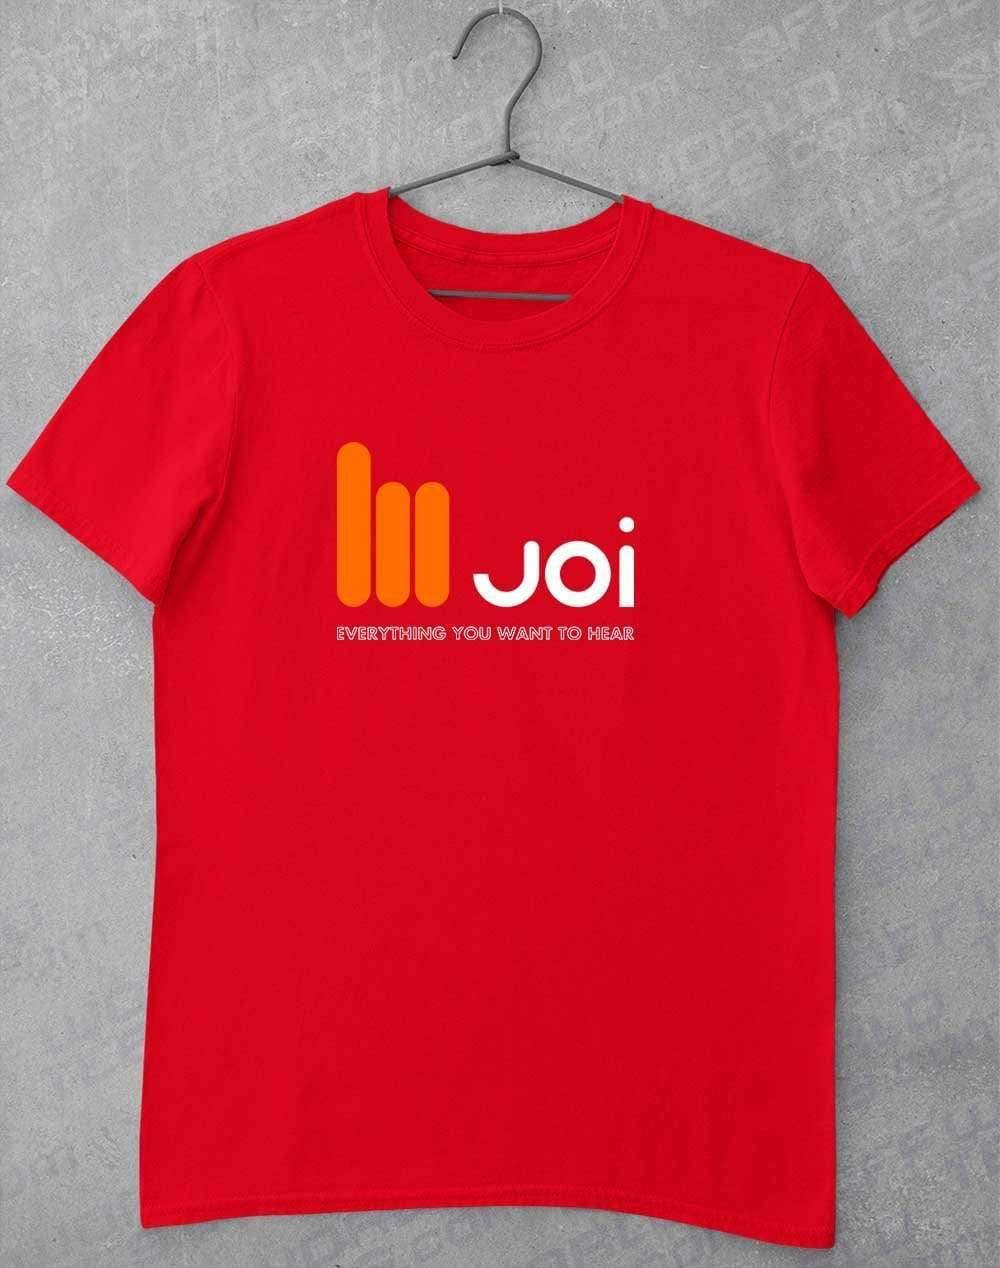 JOI Everything You Want to Hear T-Shirt S / Red  - Off World Tees